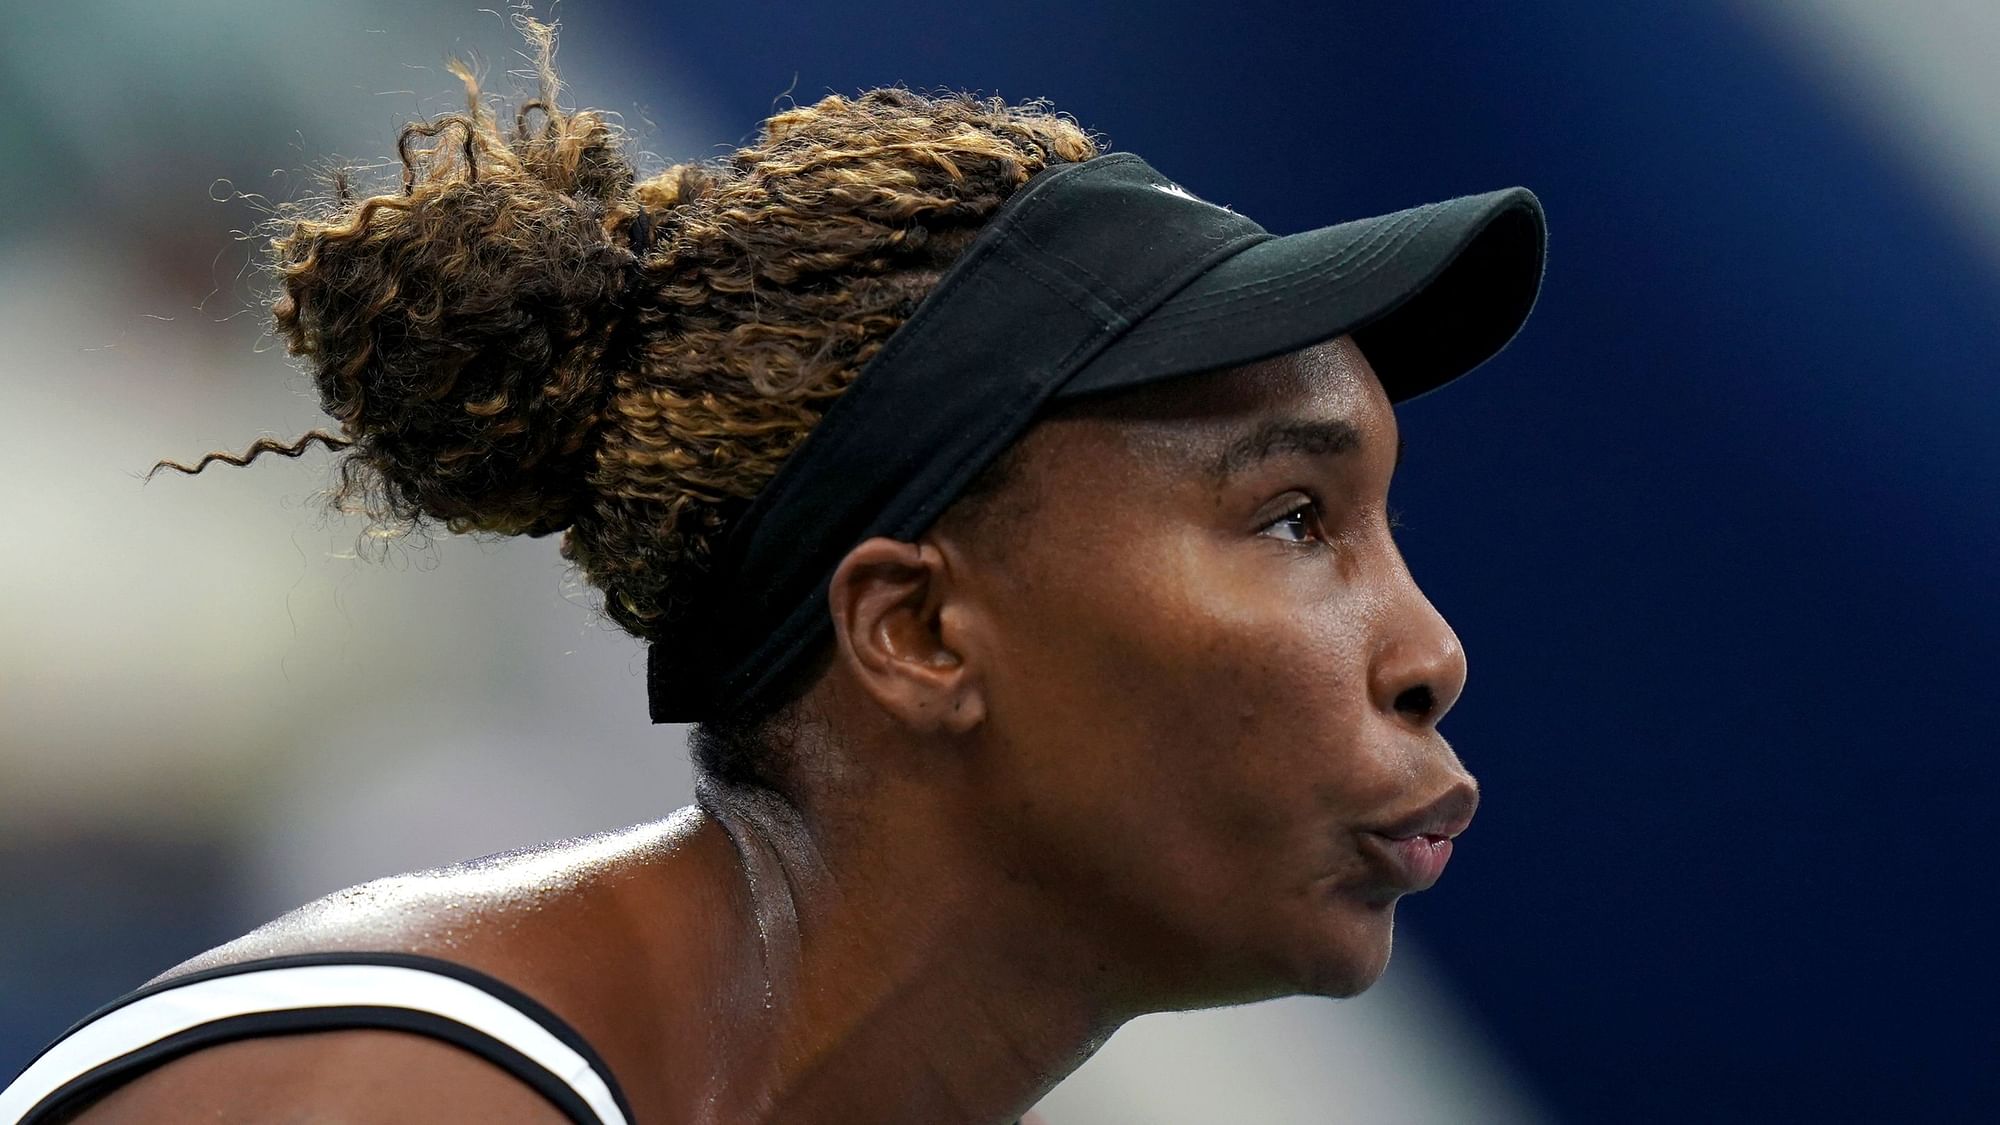 Venus Williams could not ever quite take control and lost 6-4, 6-4 to No. 5 seed Elina Svitolina.